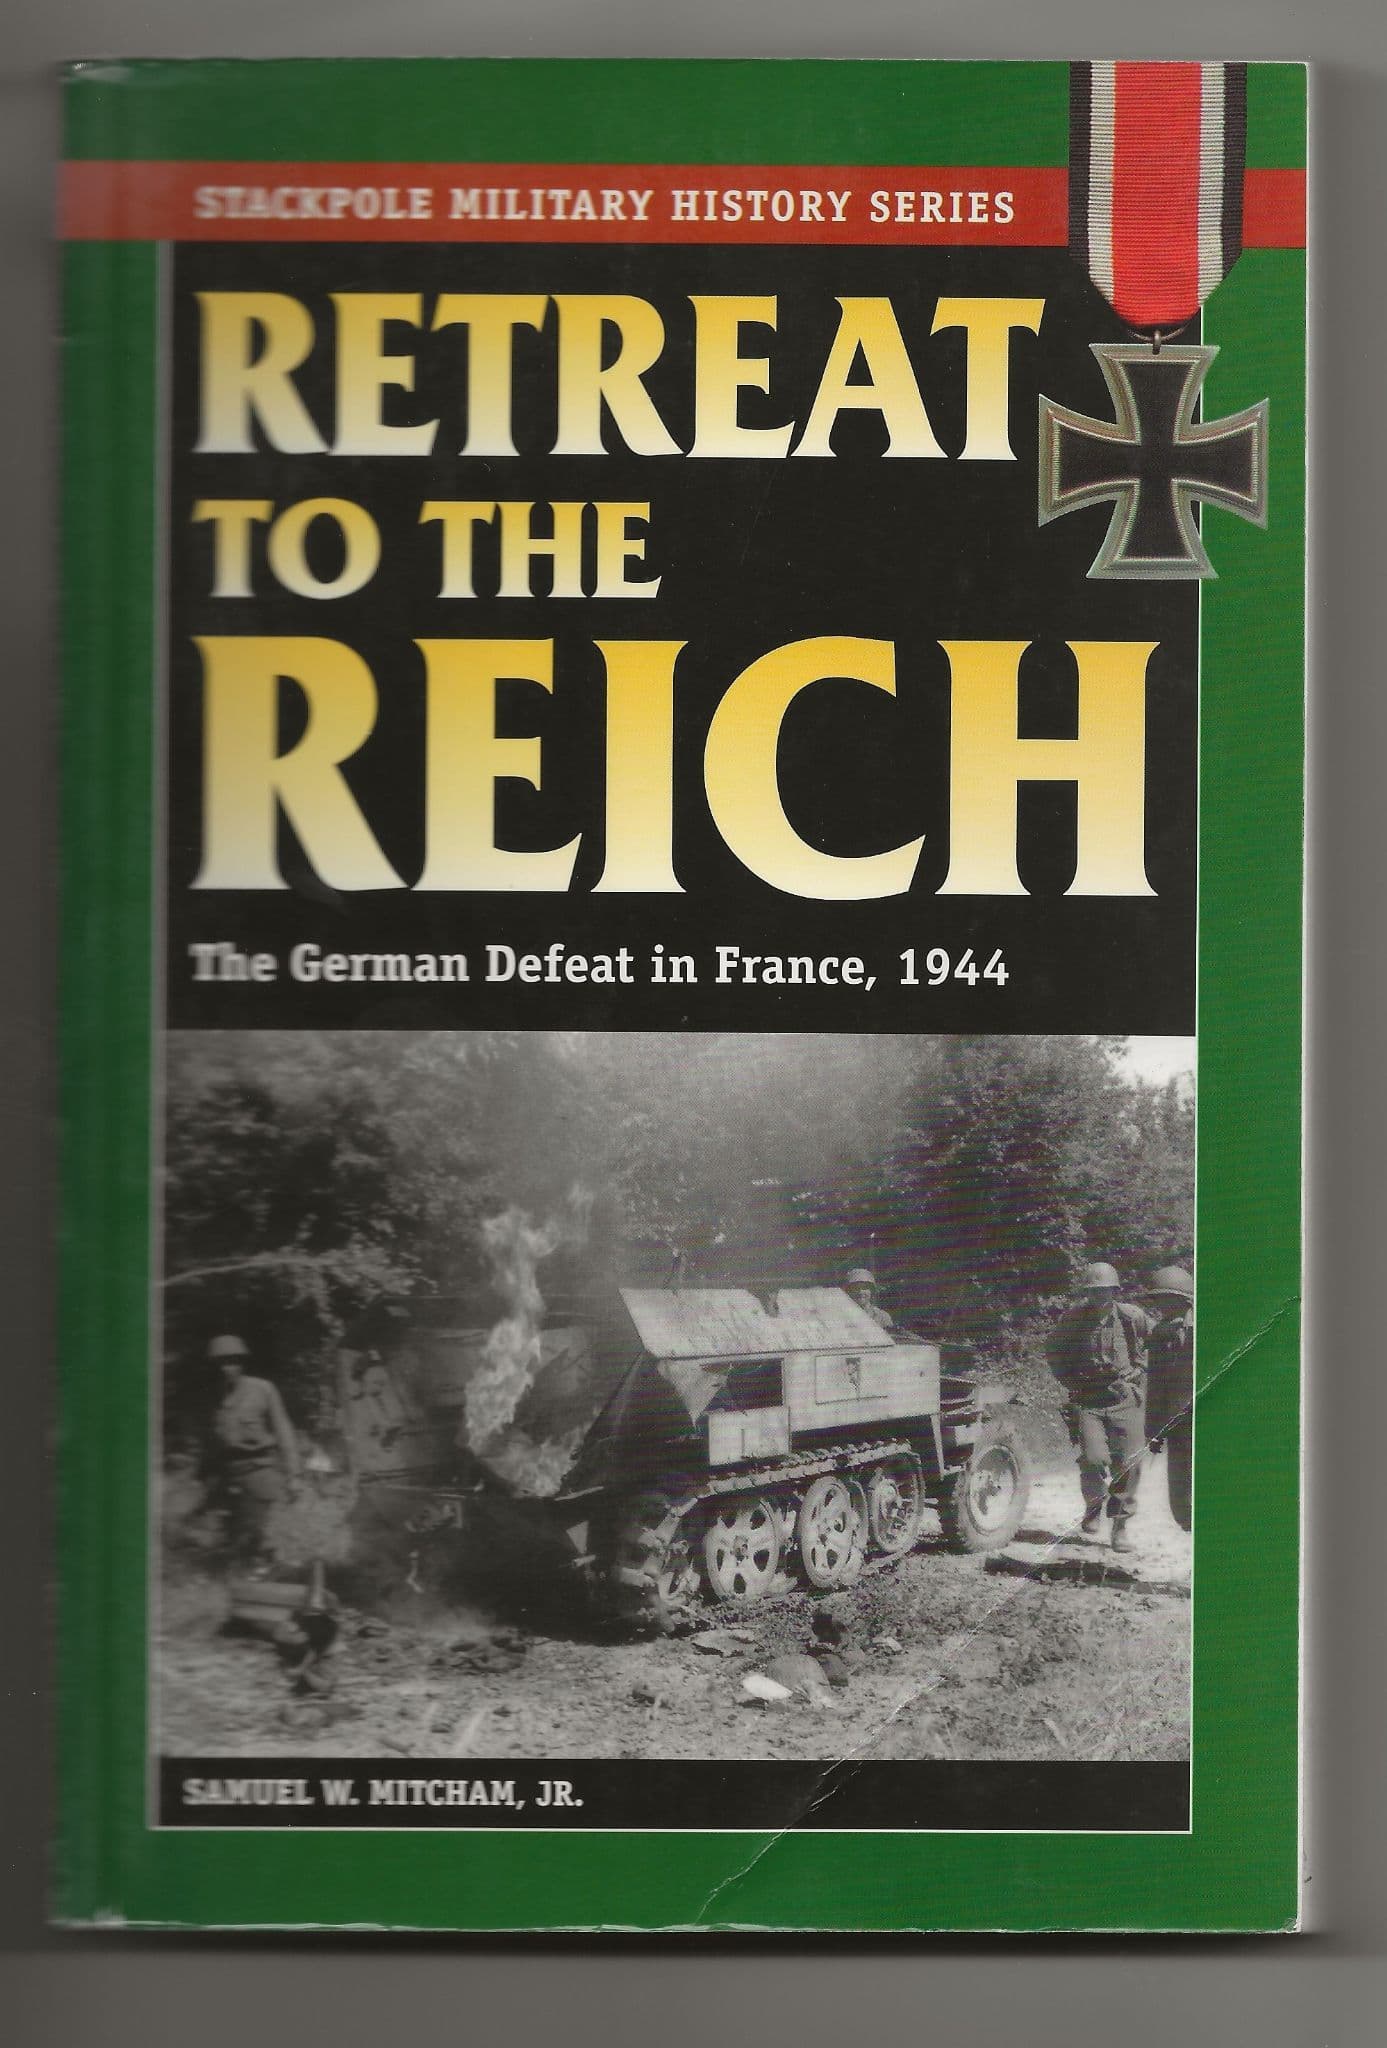 Stackpole: Retreat to the Reich, The German Defeat in France, 1944